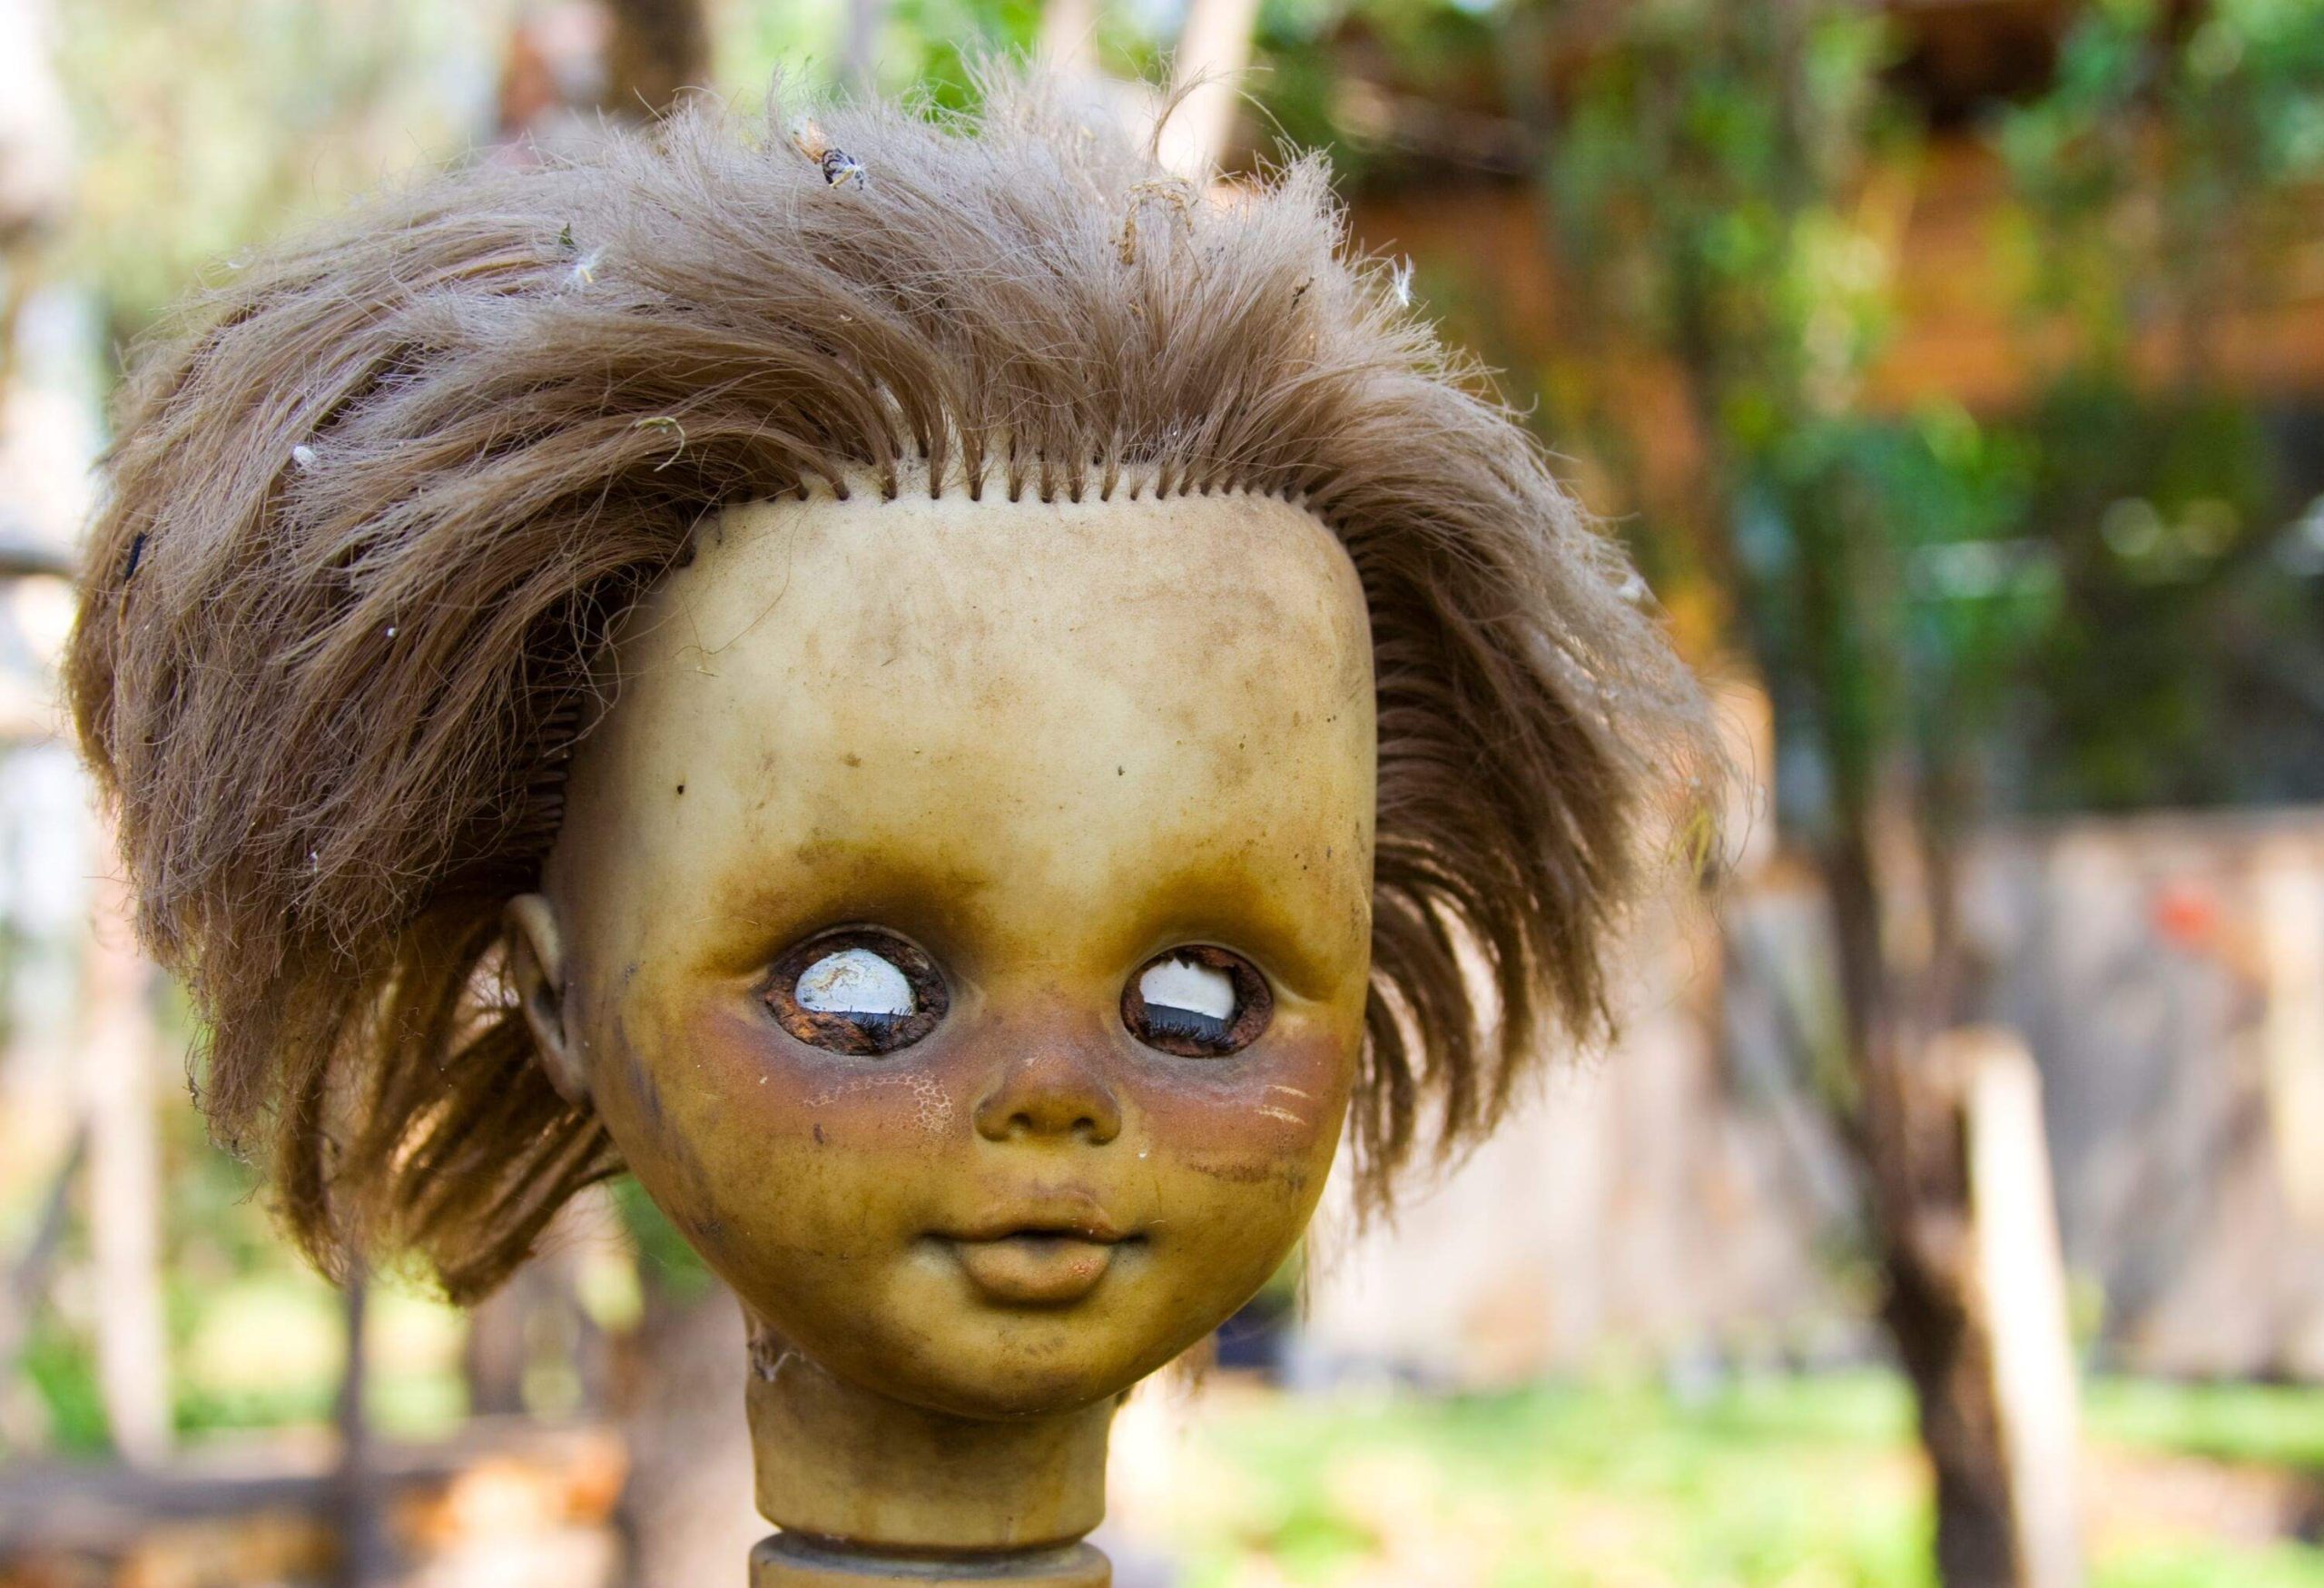 The Island of the dolls is a creepy place located in the Xochimilco´s lagoon. In this artificial Island called 